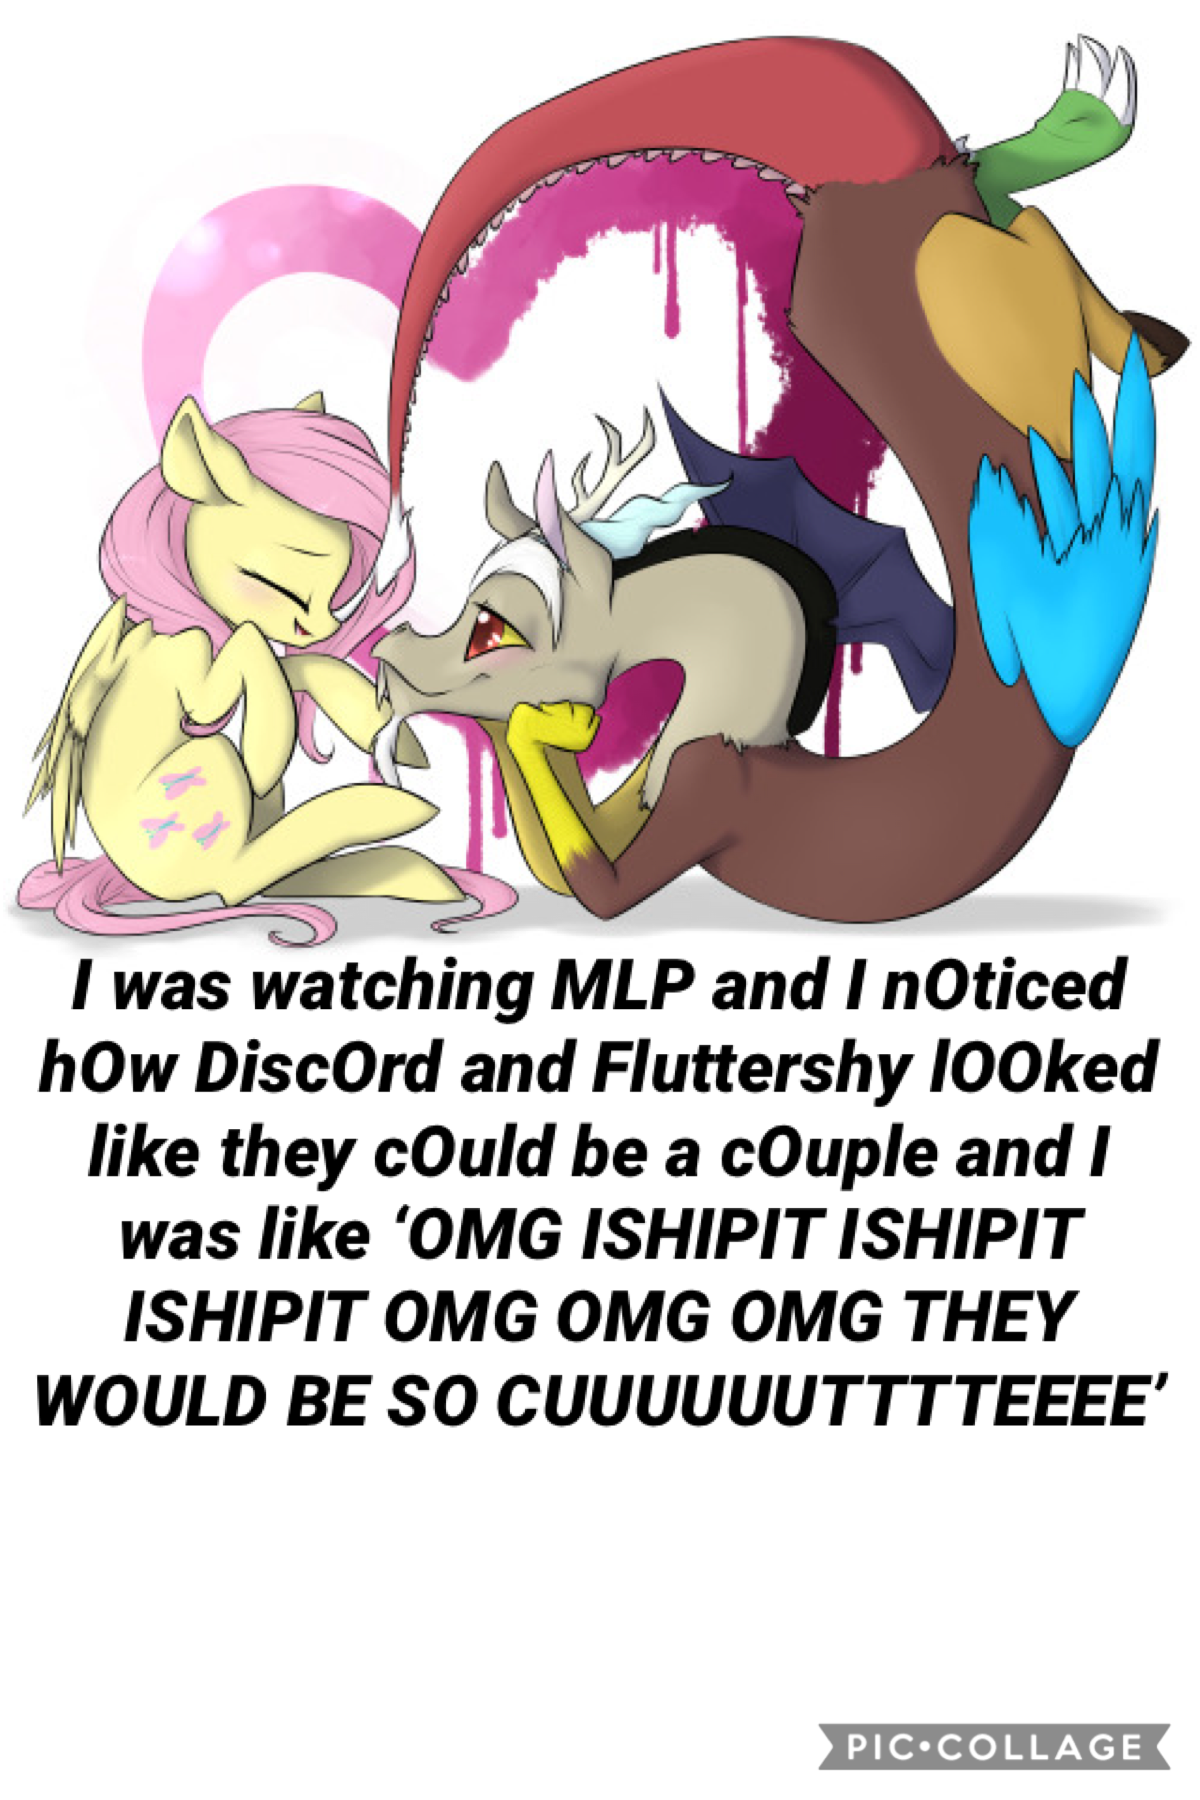 WhO needs Flutterdash when yOu can have FluttercOrd??? 